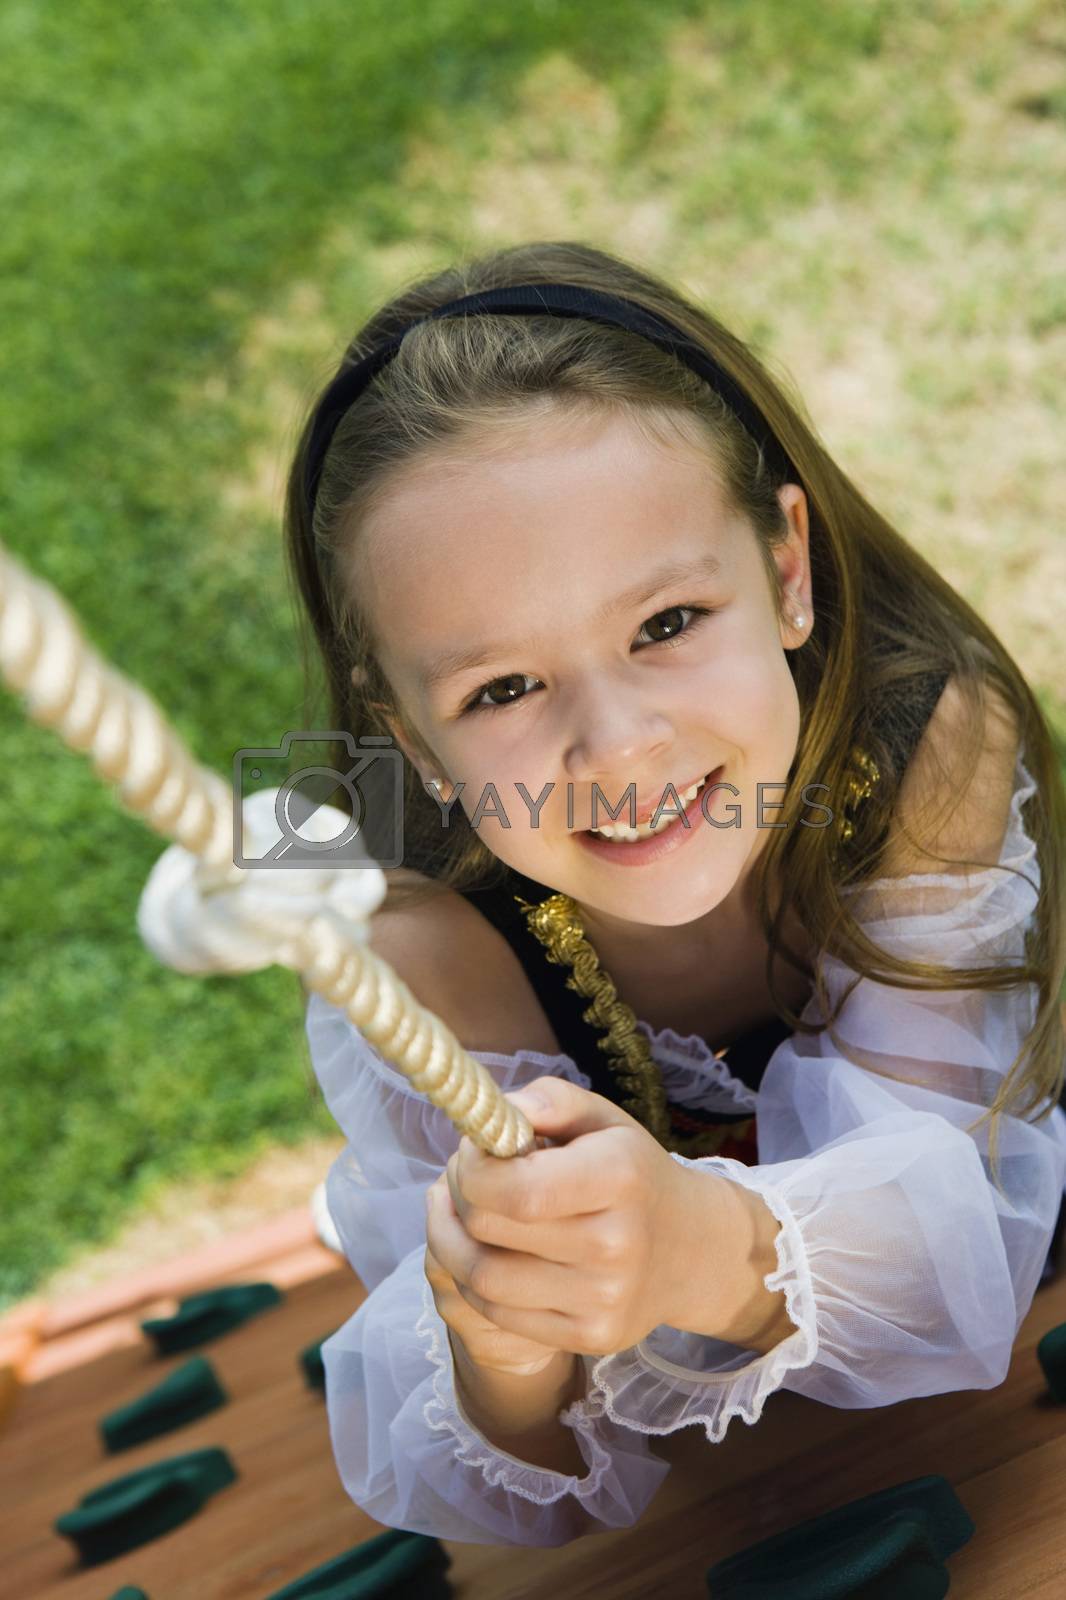 Royalty free image of Dressed up Little Girl Climbing a Rope by moodboard